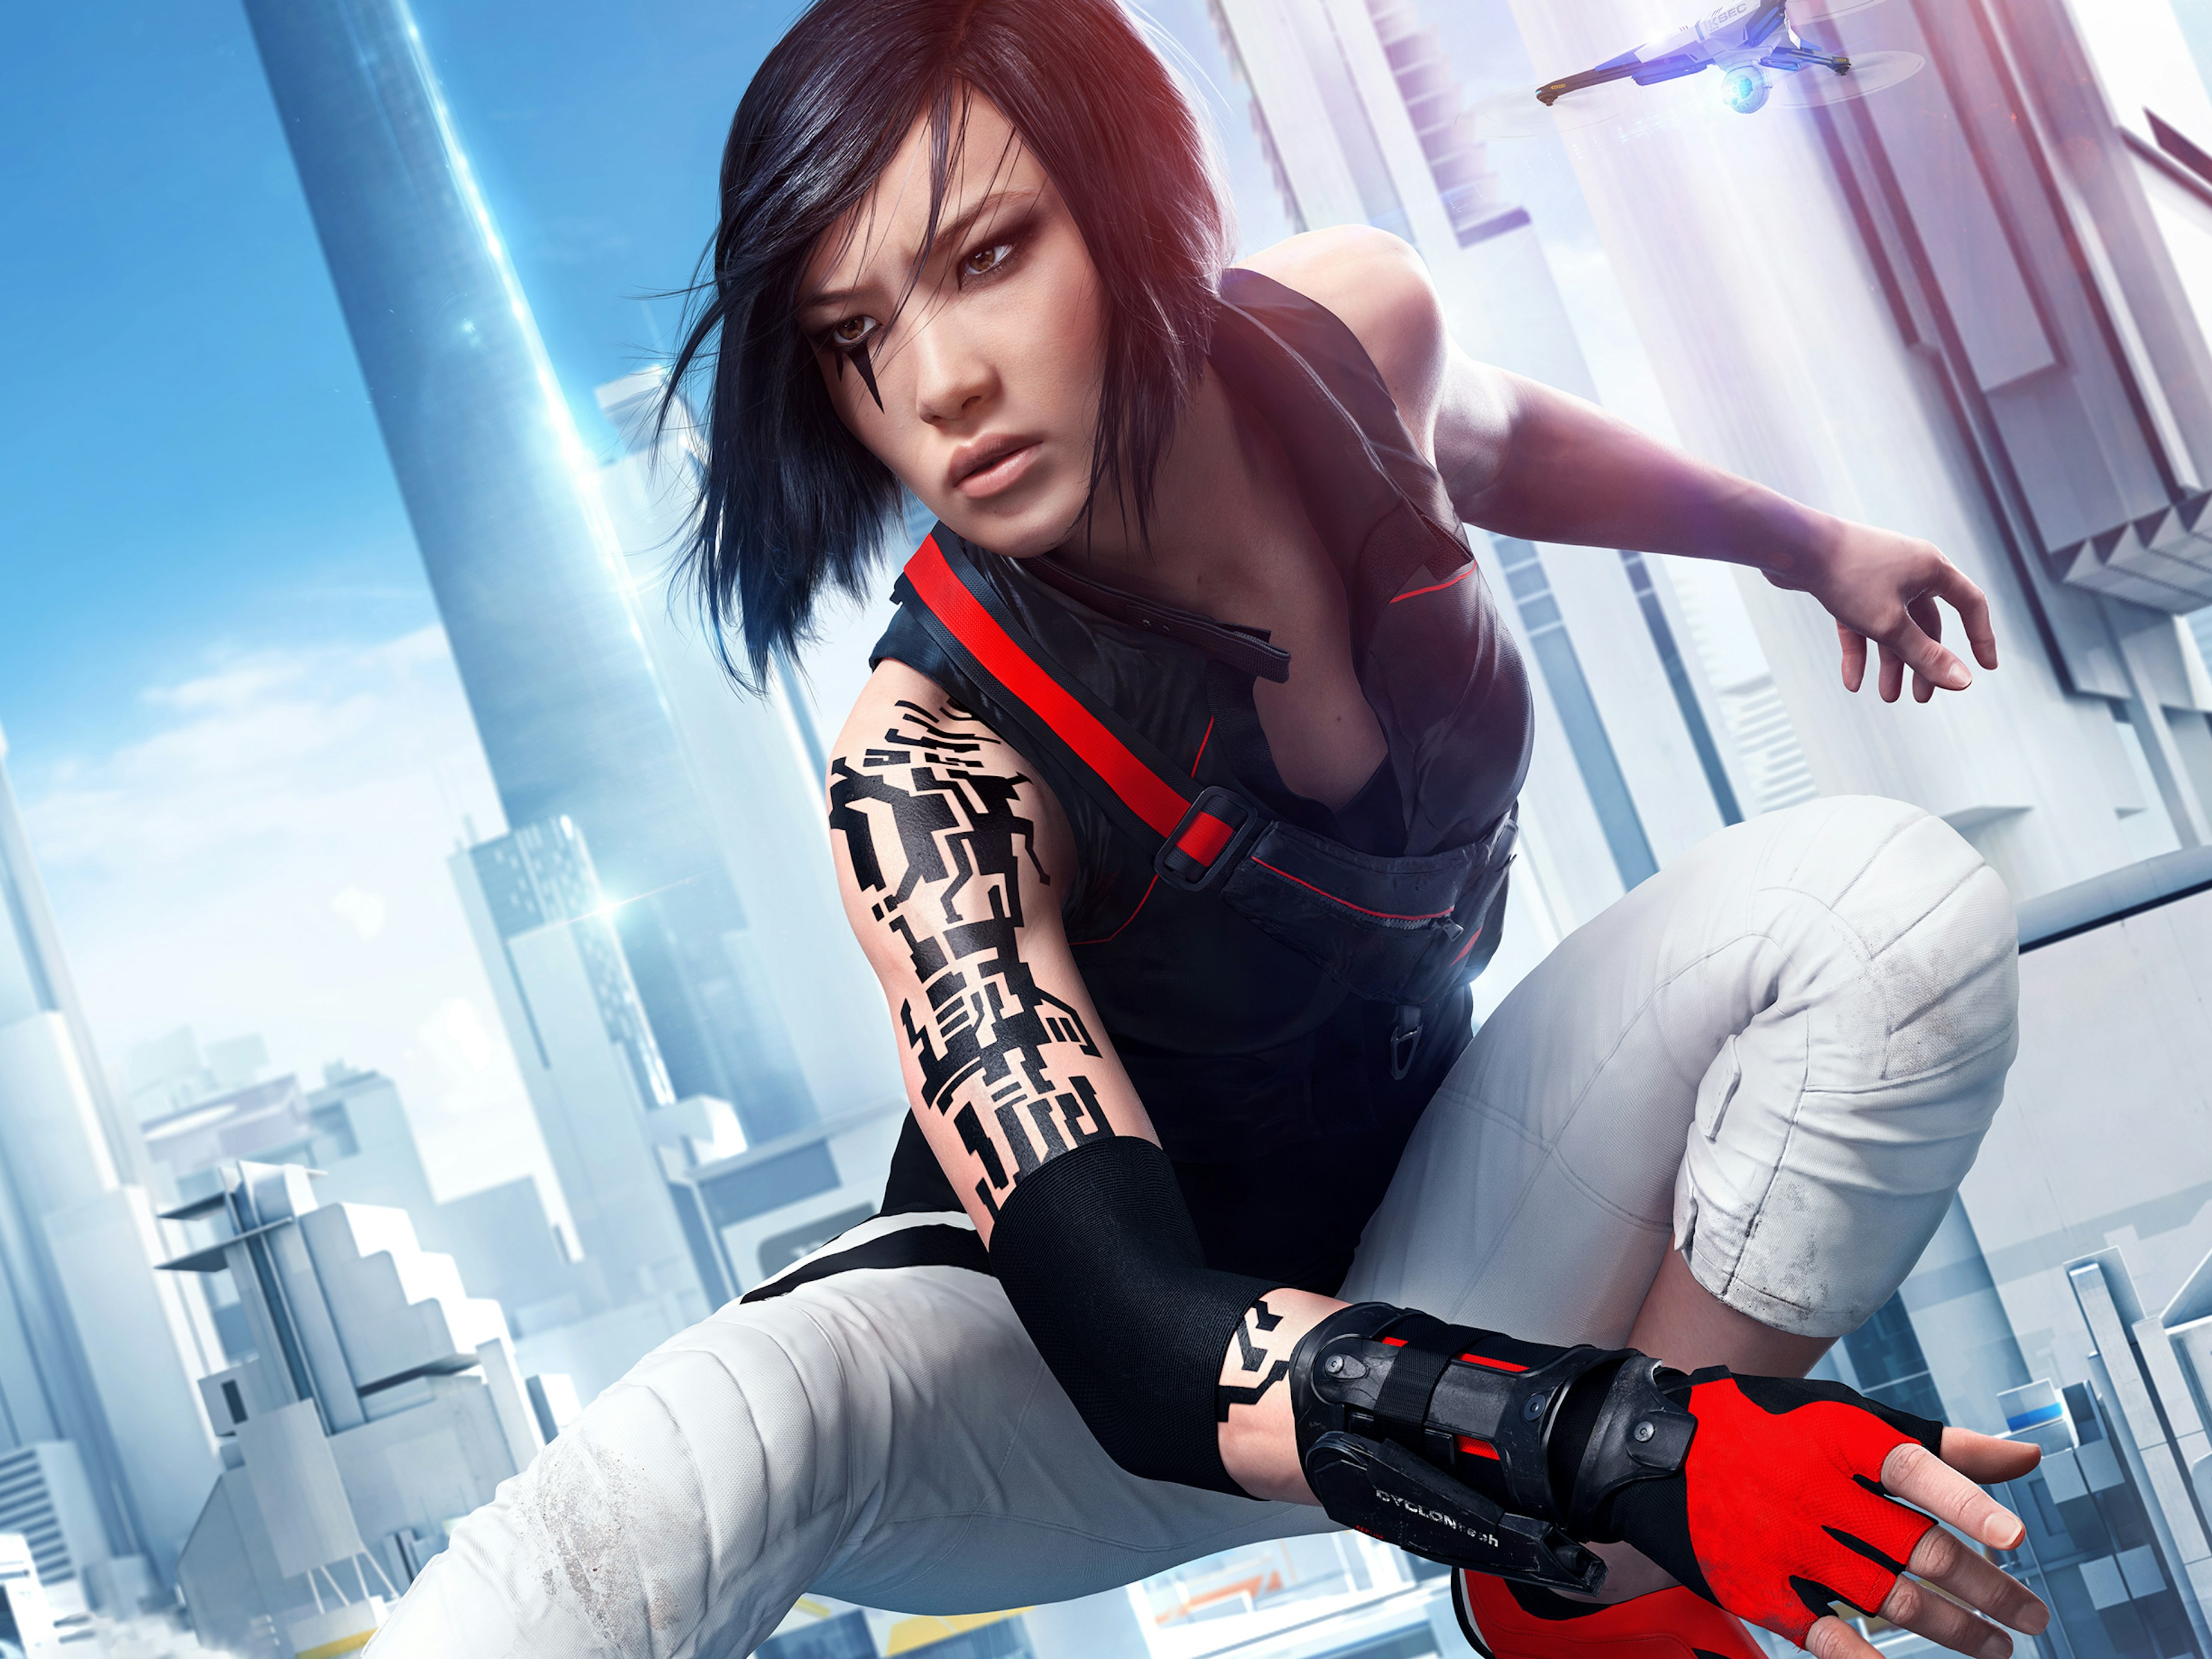 Mirror S Edge Catalyst Story Trailer Proves It S More Than A Sleek